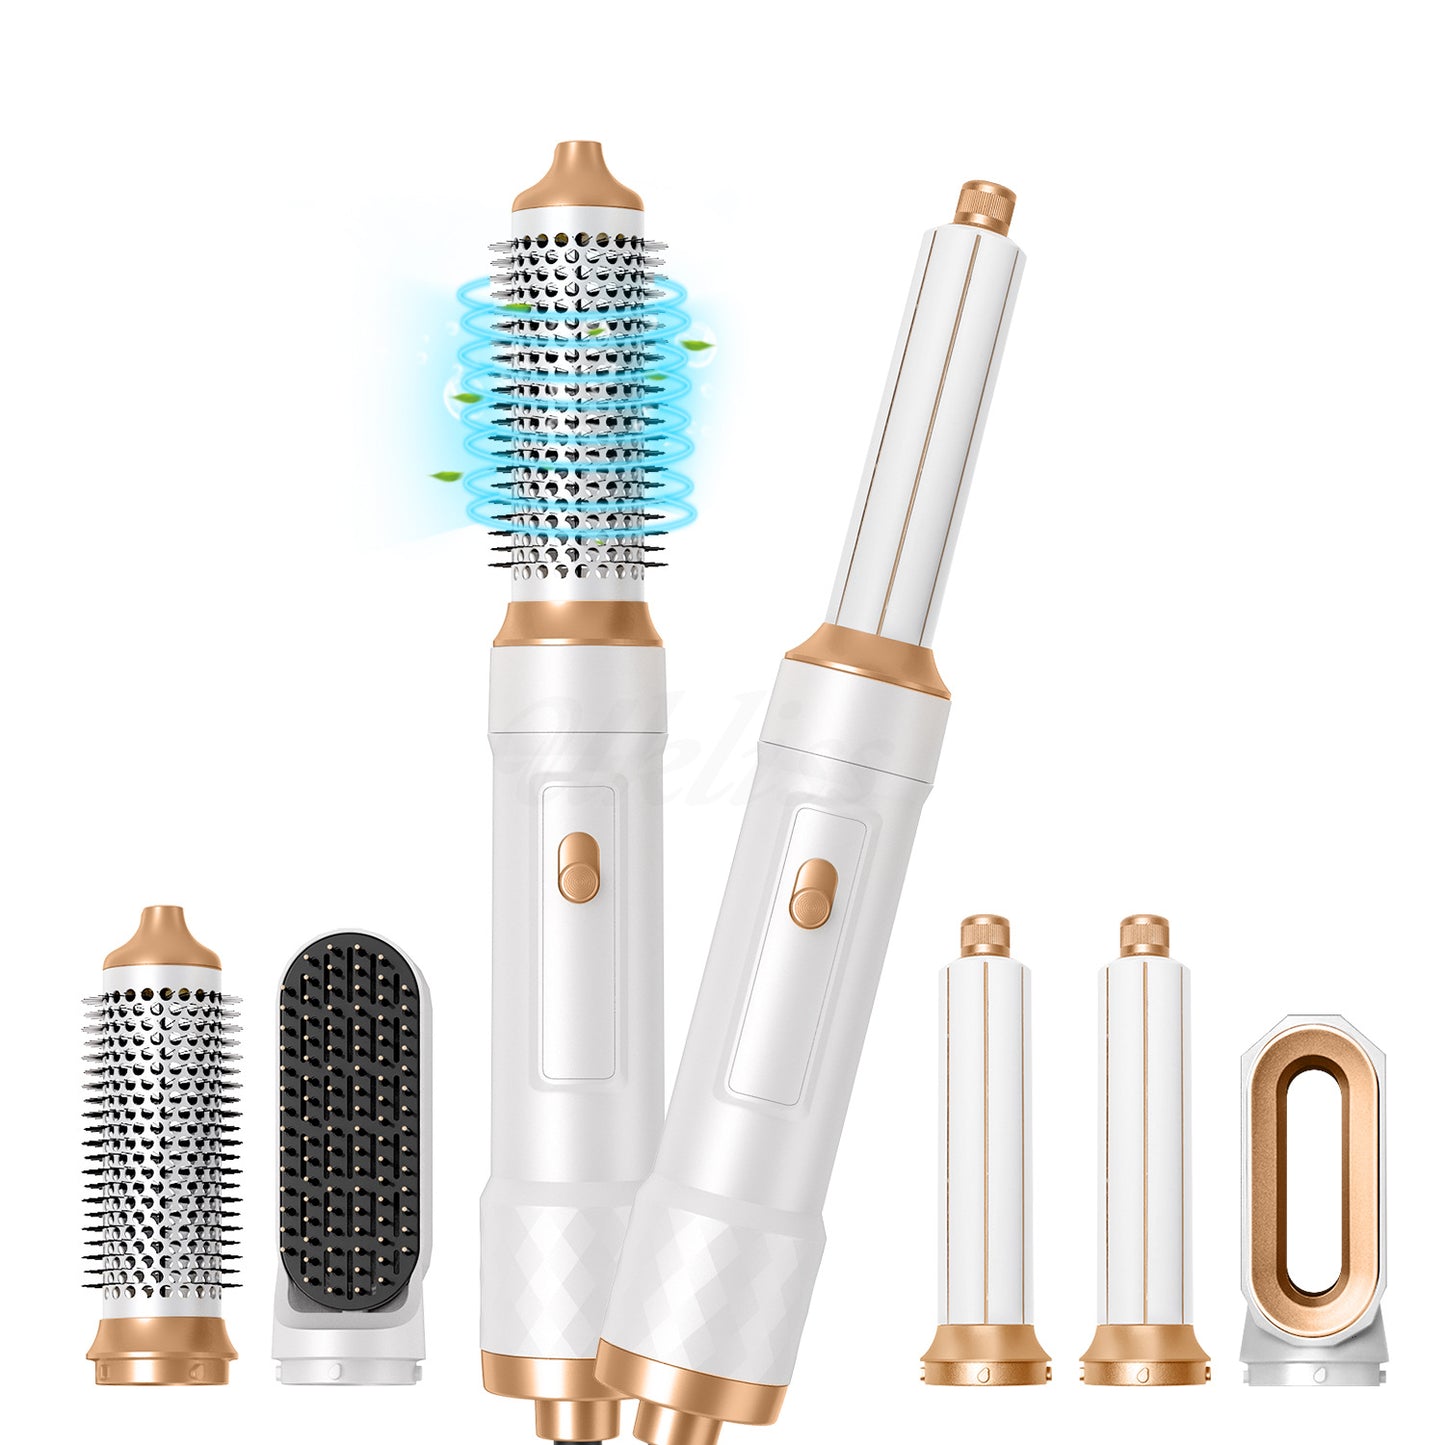 Five-in-one Hot Air Comb Multi-function Anion Blowing Combs Automatic Curler Straight Hair Dryer